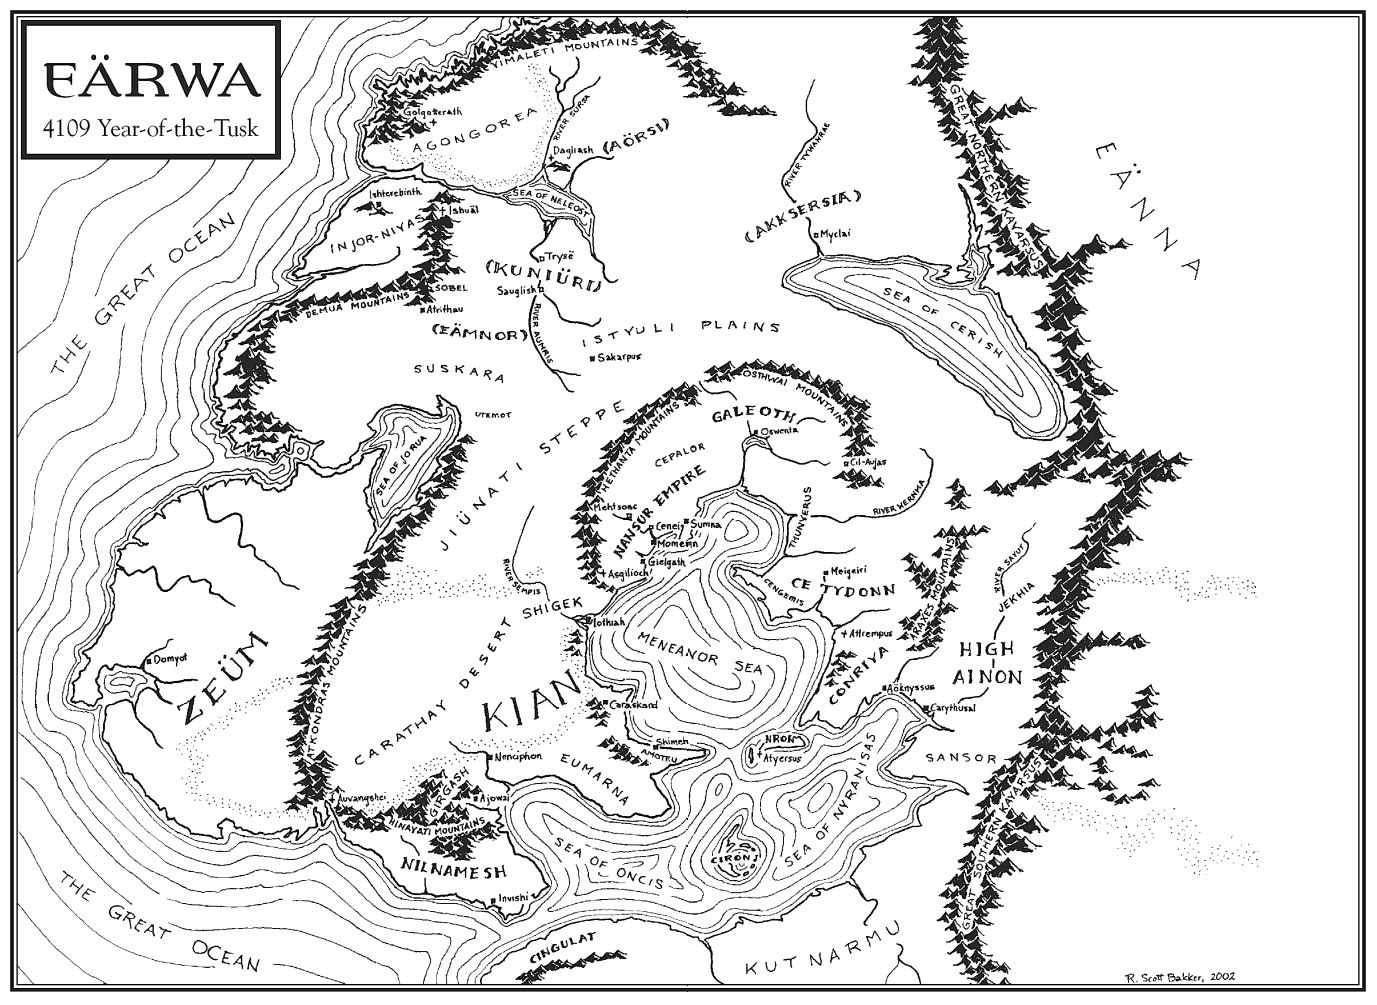 Handmade Wood Map of Earwa from the Prince of Nothing book series